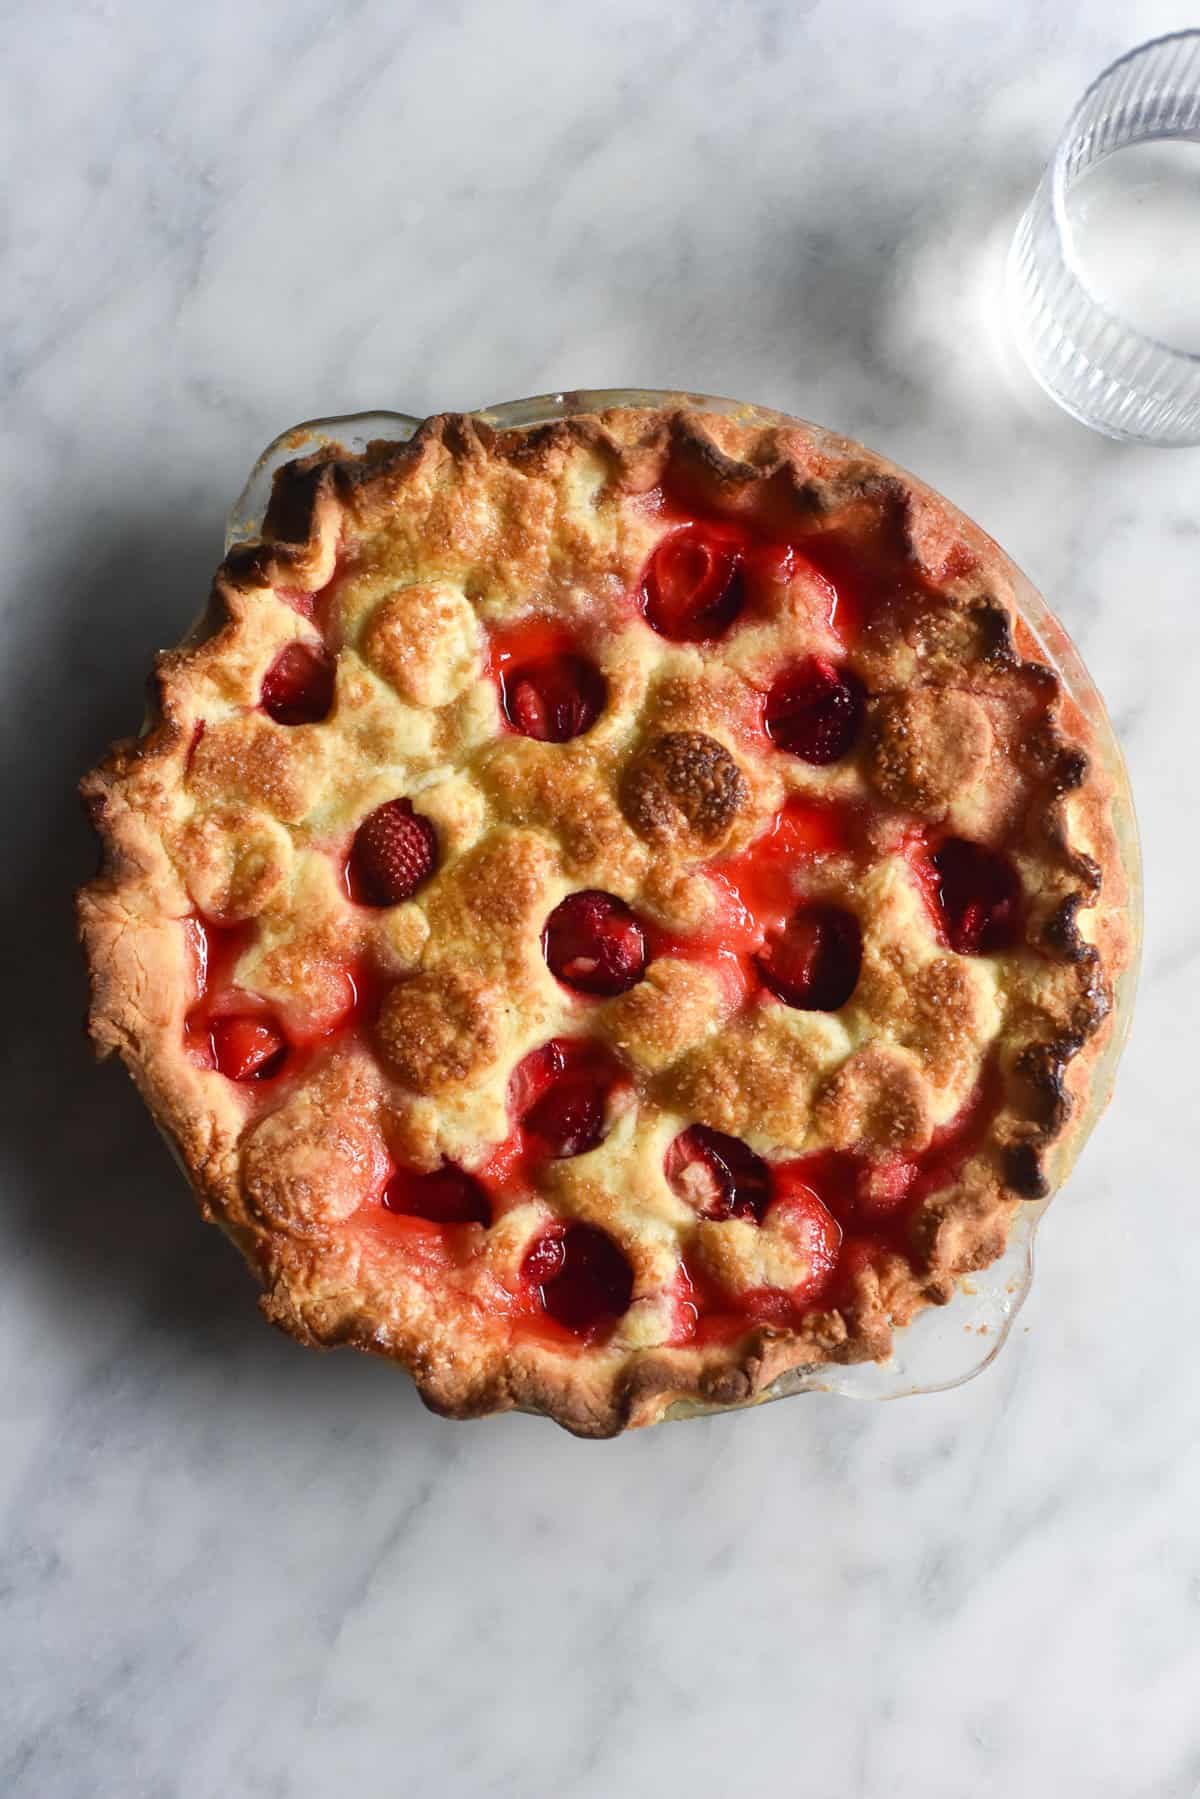 Gluten free strawberry pie on a white marble table. The pastry is golden brown and has holes of pastry removed in a pattern, revealing the cooked strawberries underneath. 